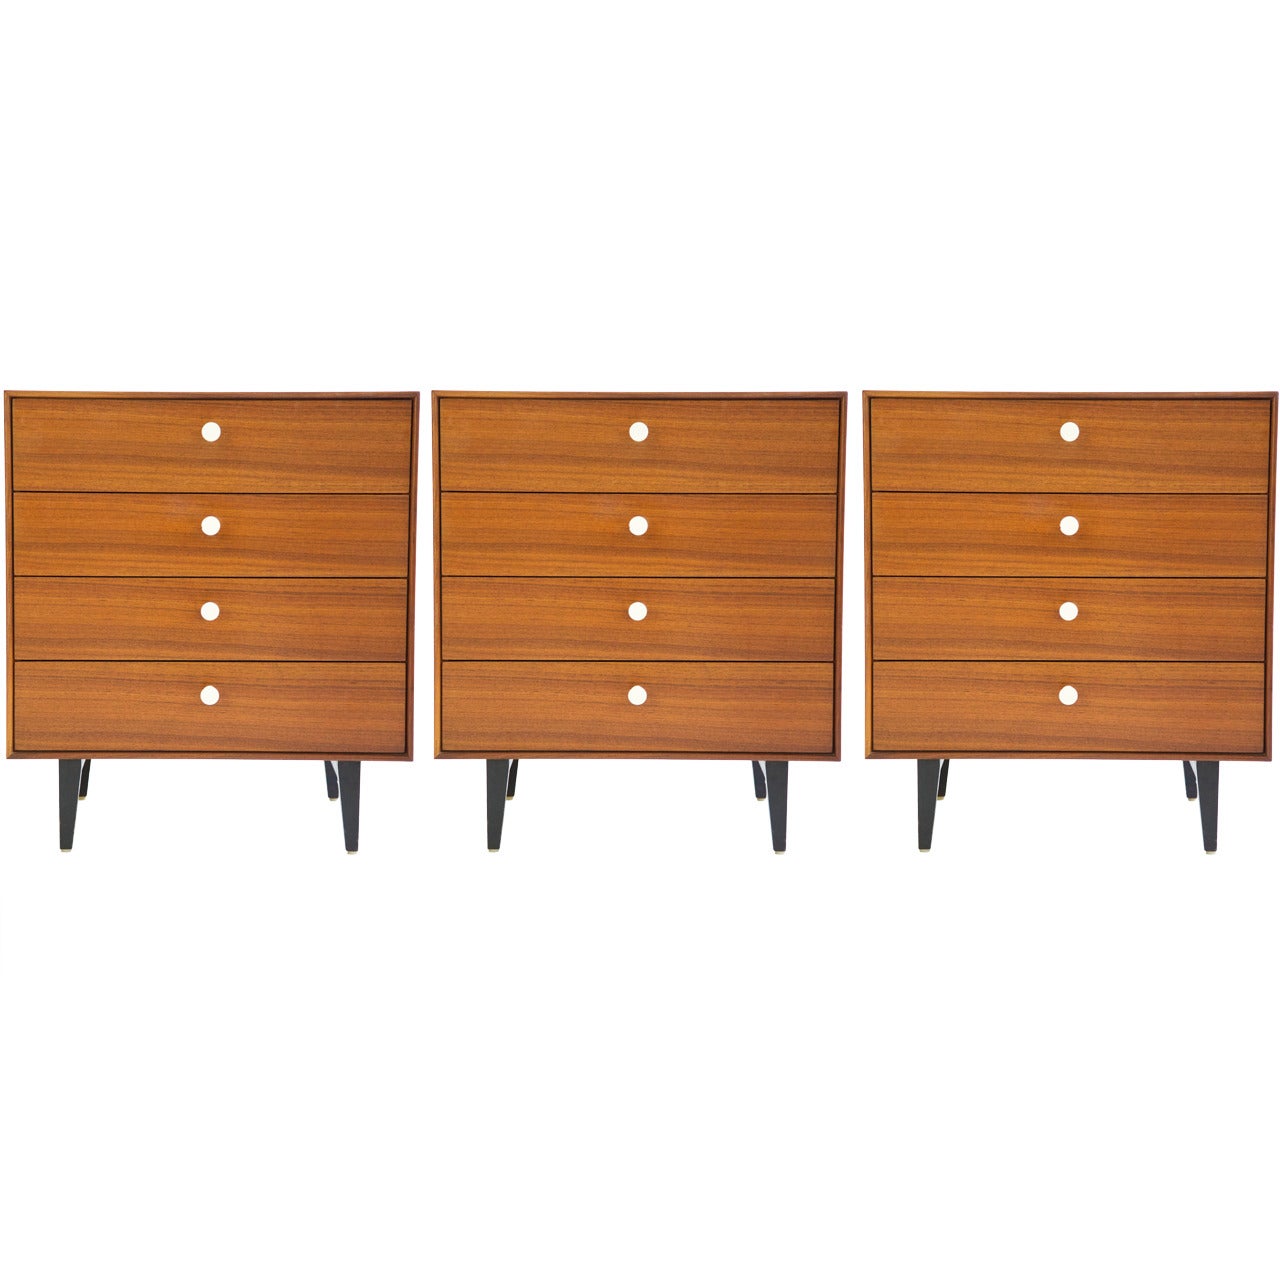 George Nelson Thin Edge Dressers or Night Stands